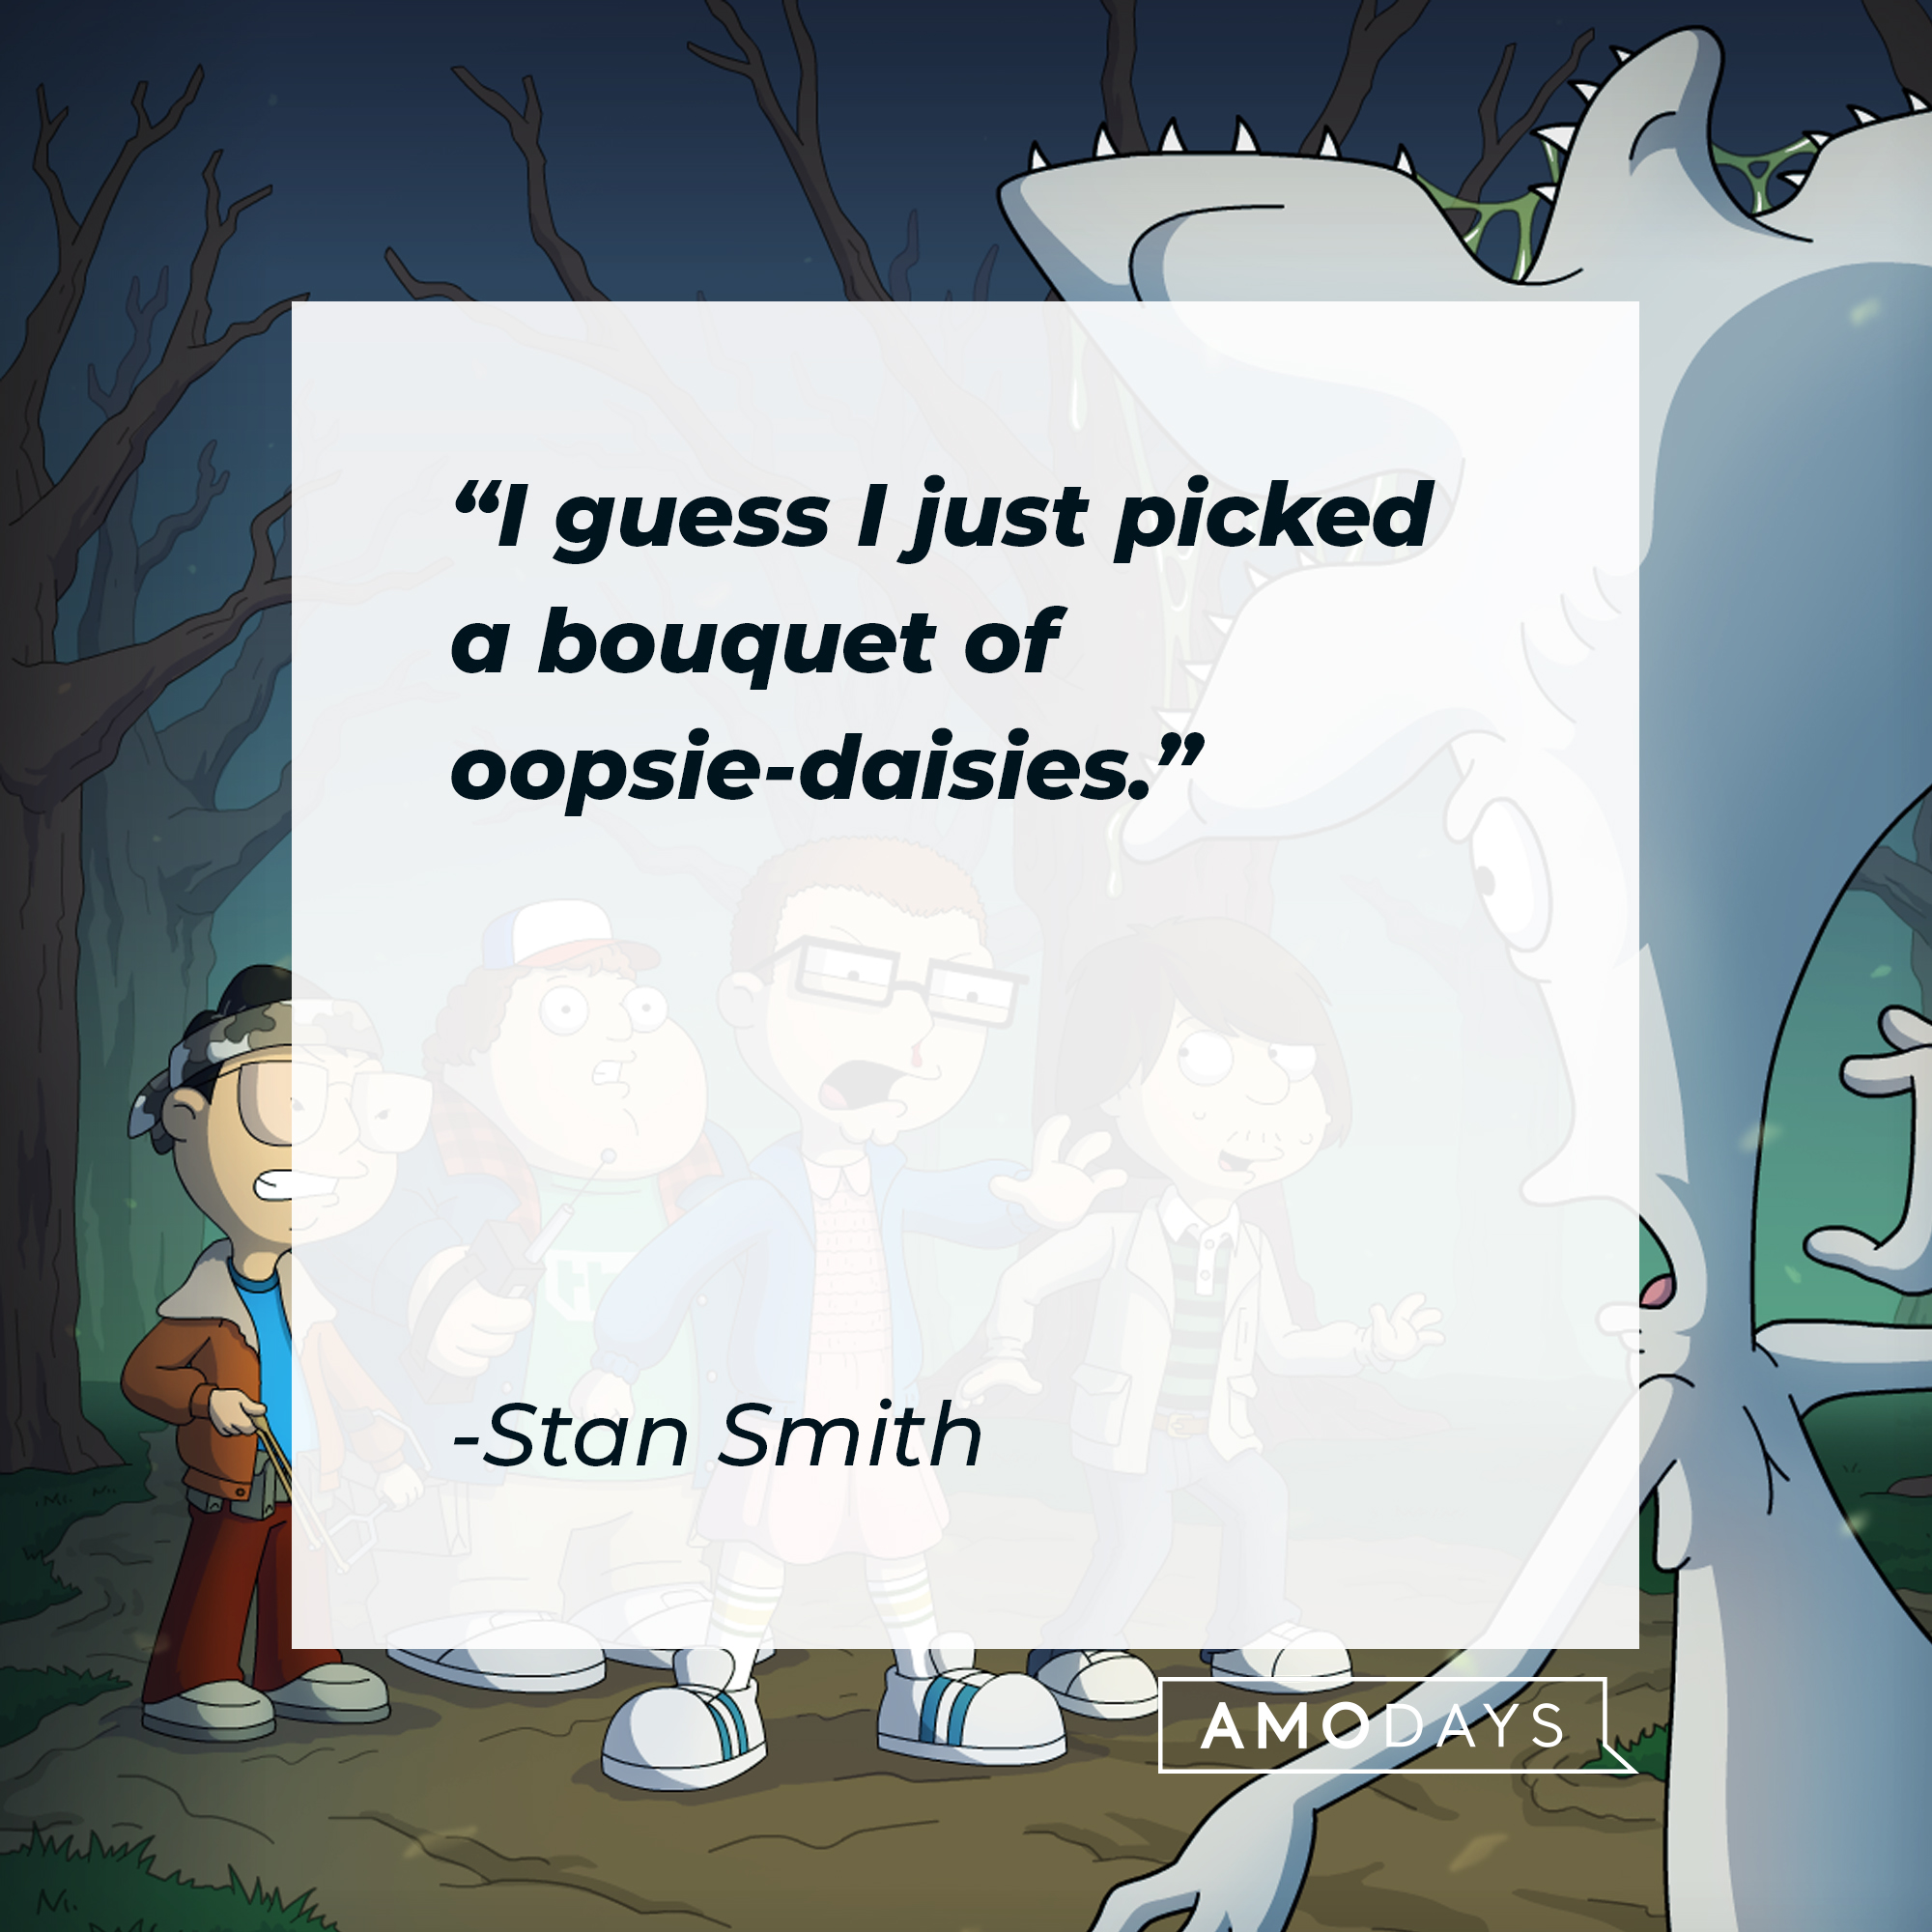 Stan Smith's quote: "I guess I just picked a bouquet of oopsie-daisies." | Source: facebook.com/AmericanDad